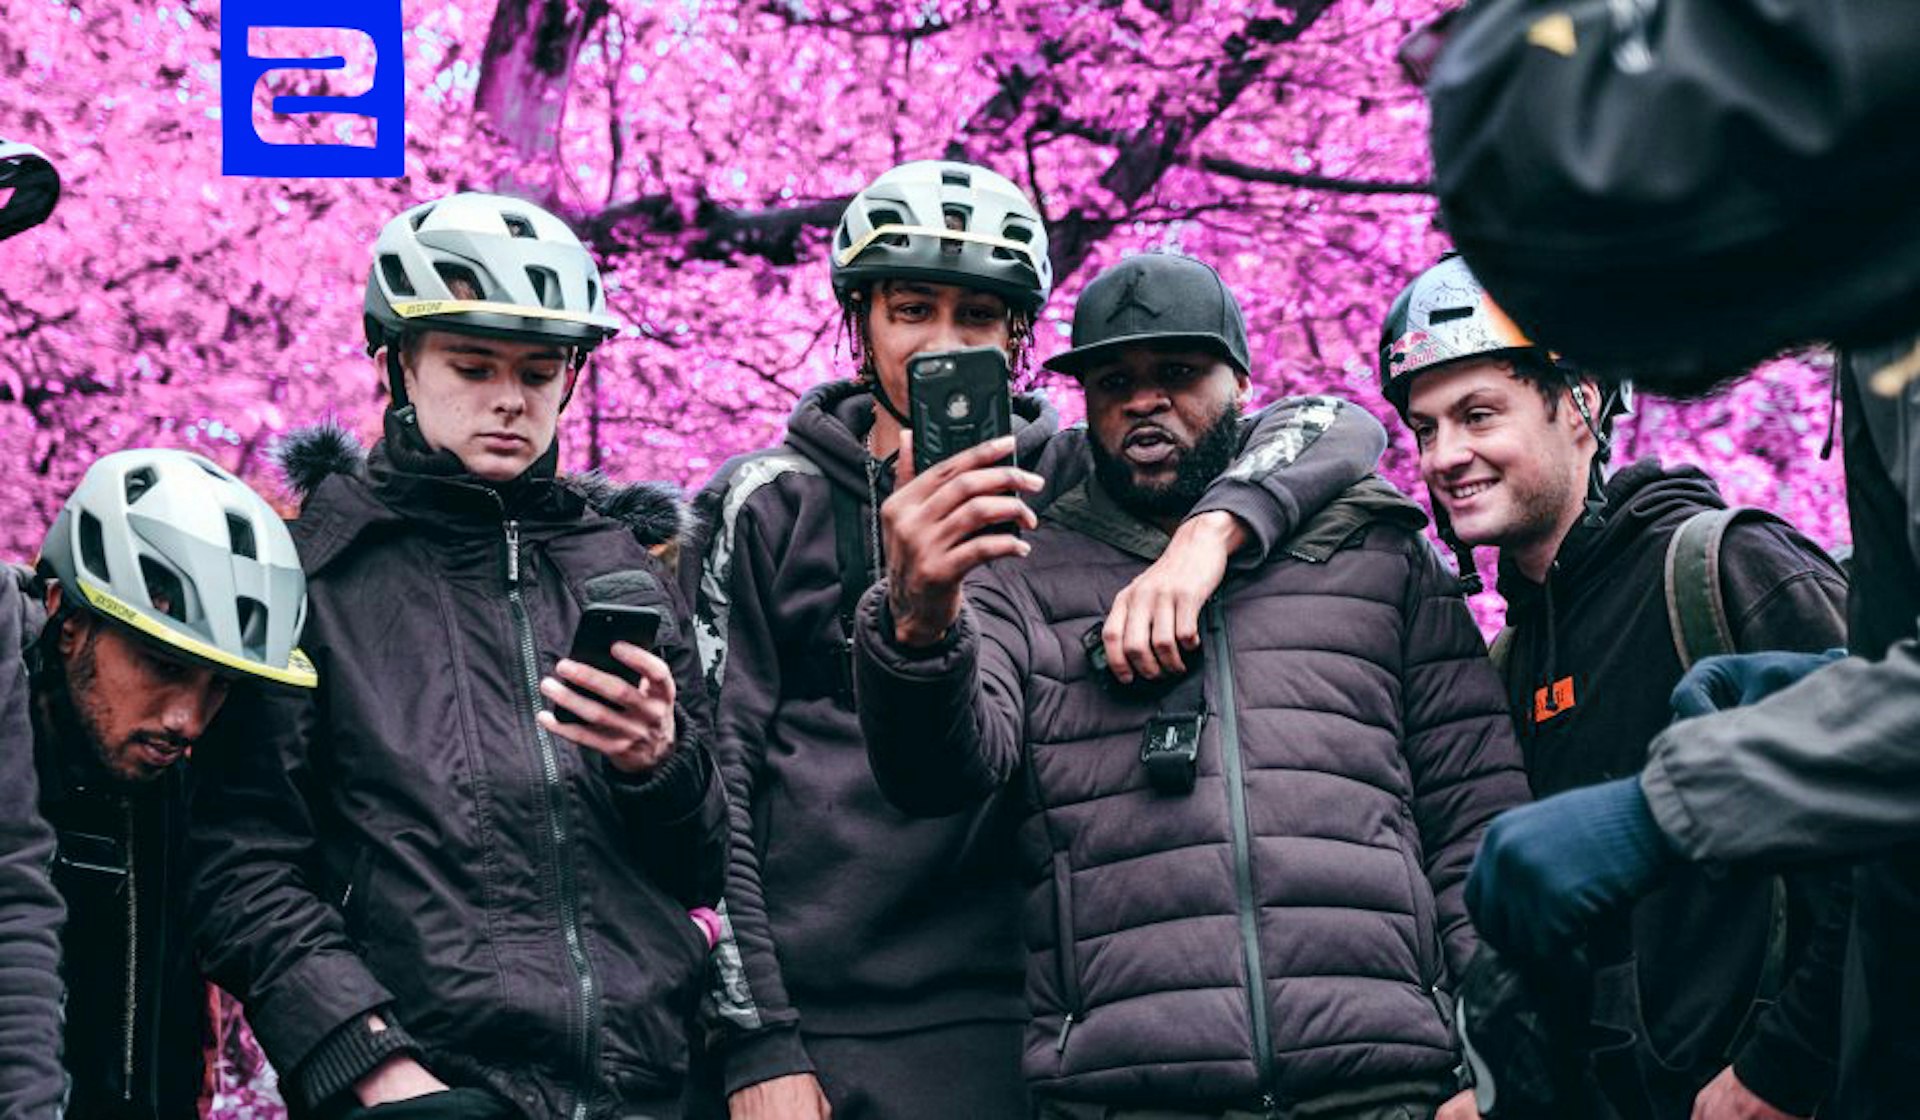 A trip to the countryside with London’s Bikestormz crew